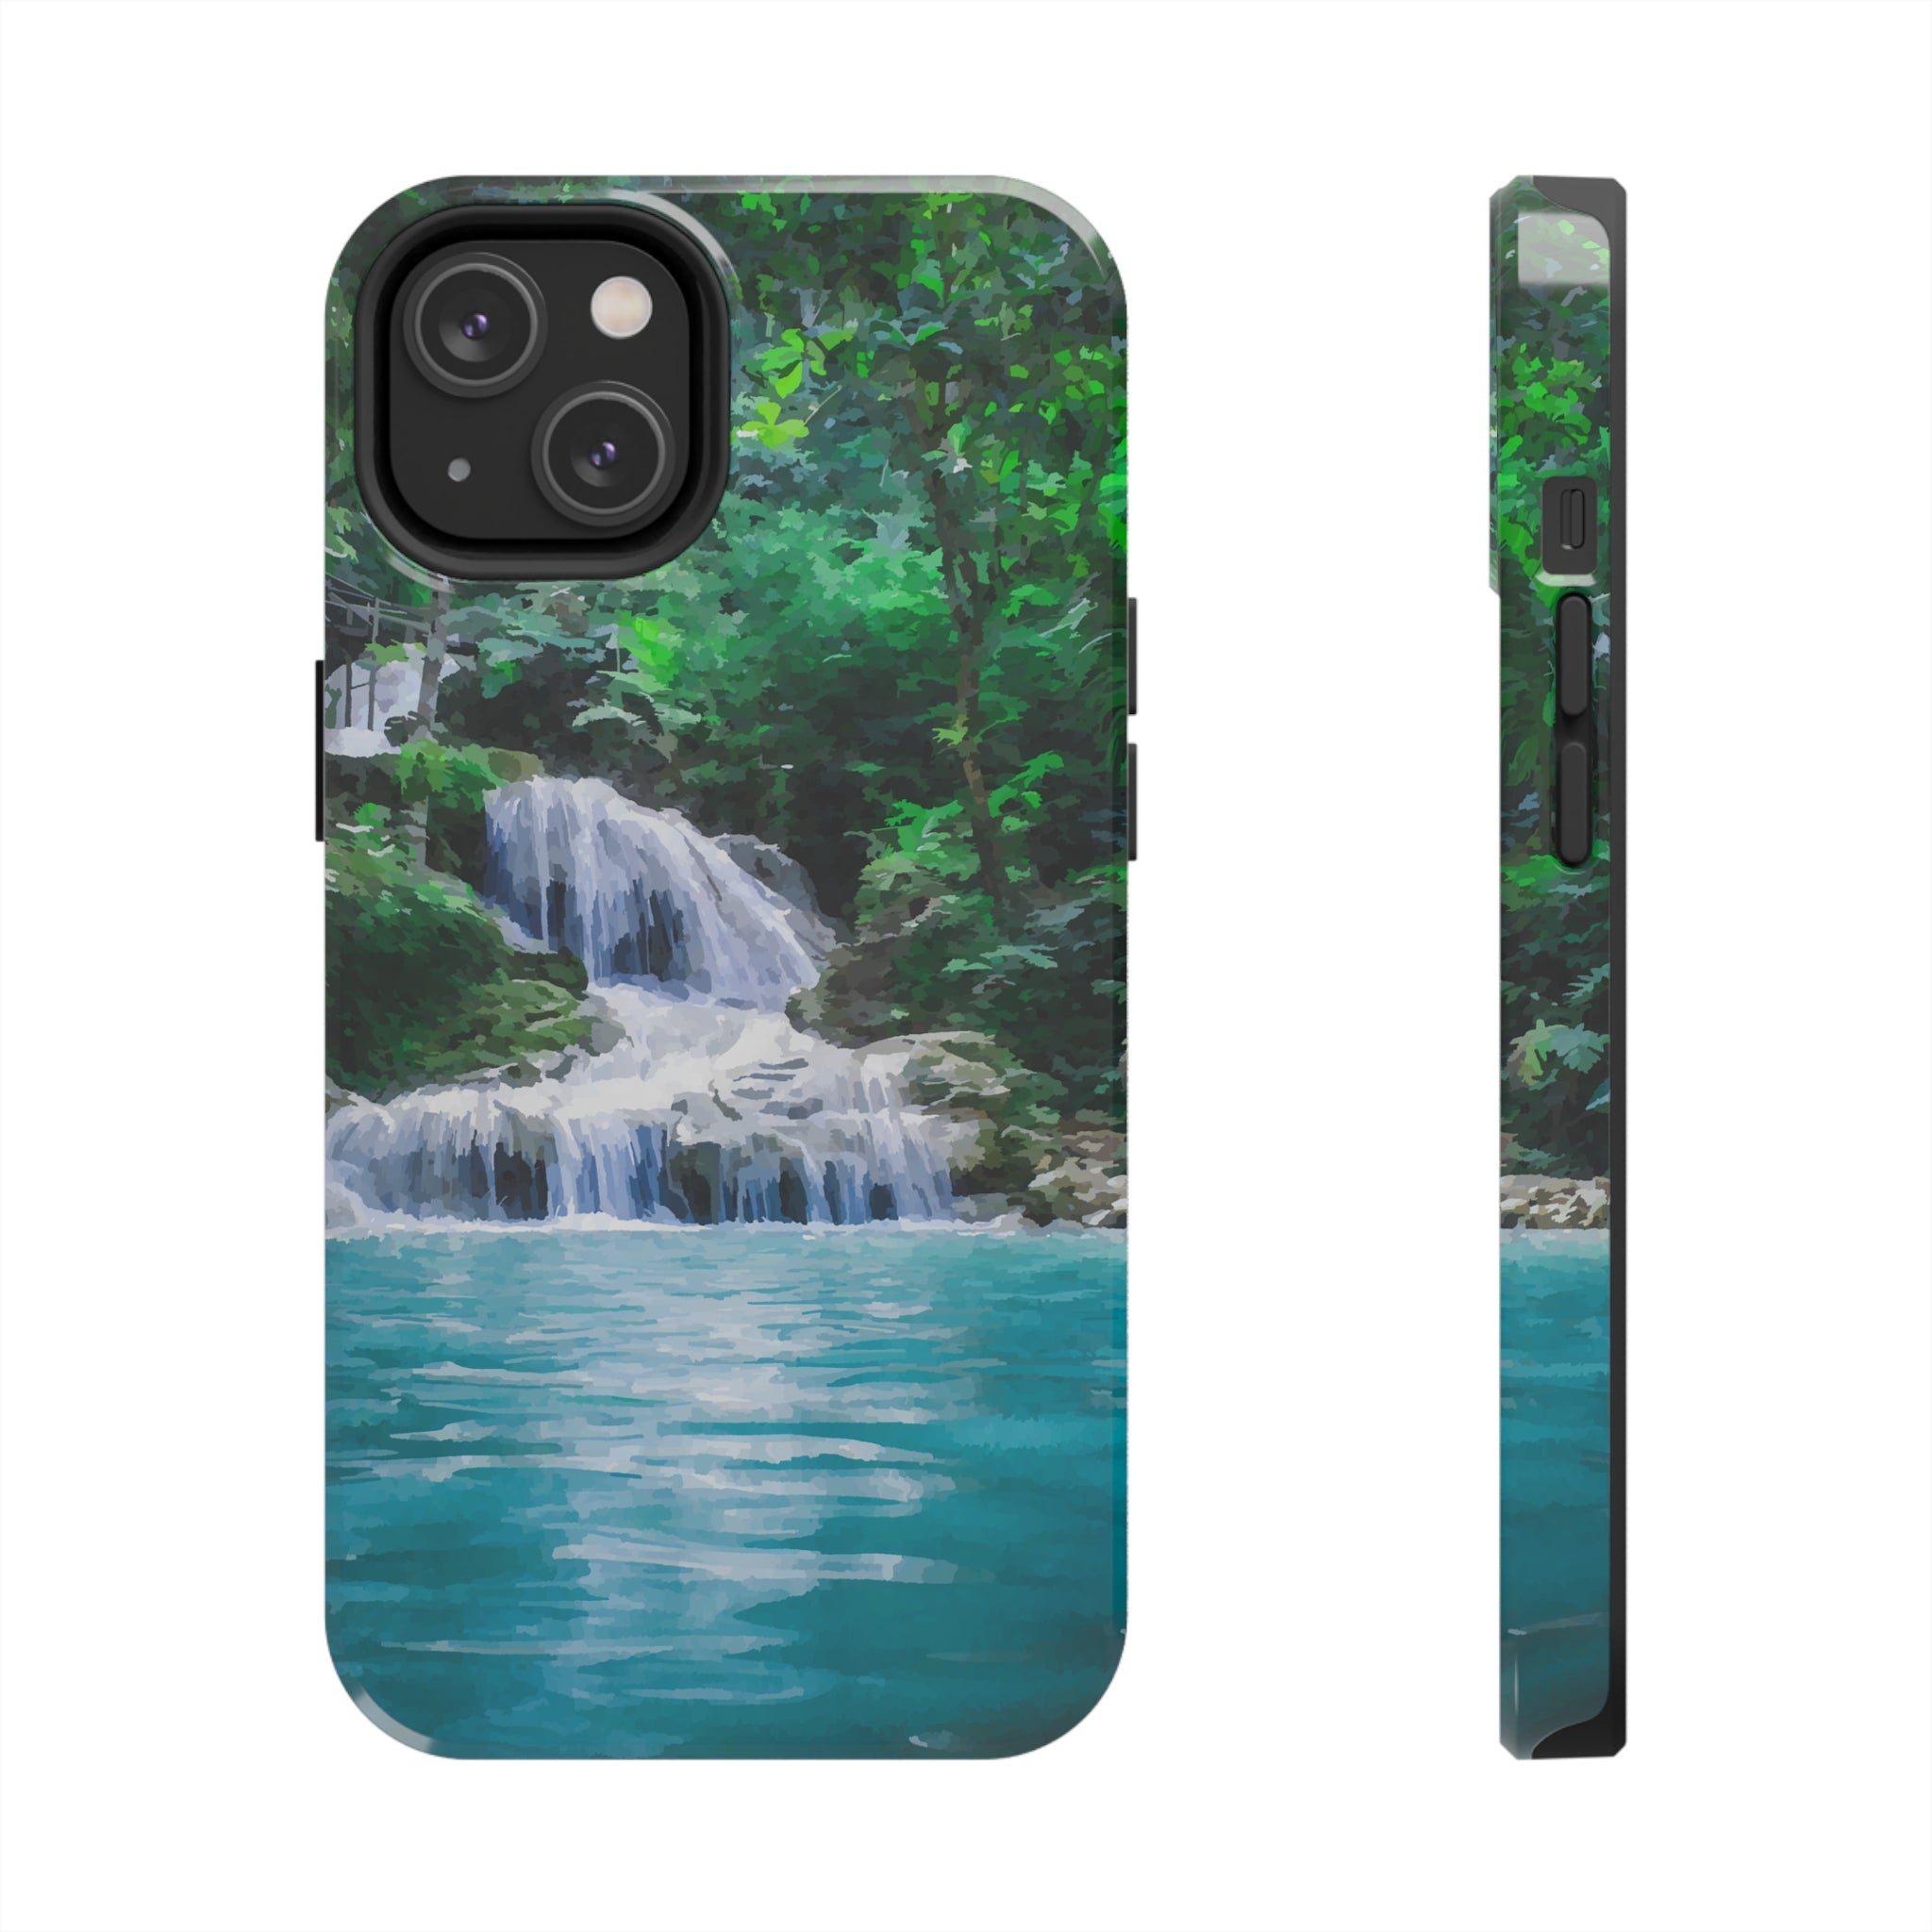 Main image of Jungle Waterfall iPhone Case